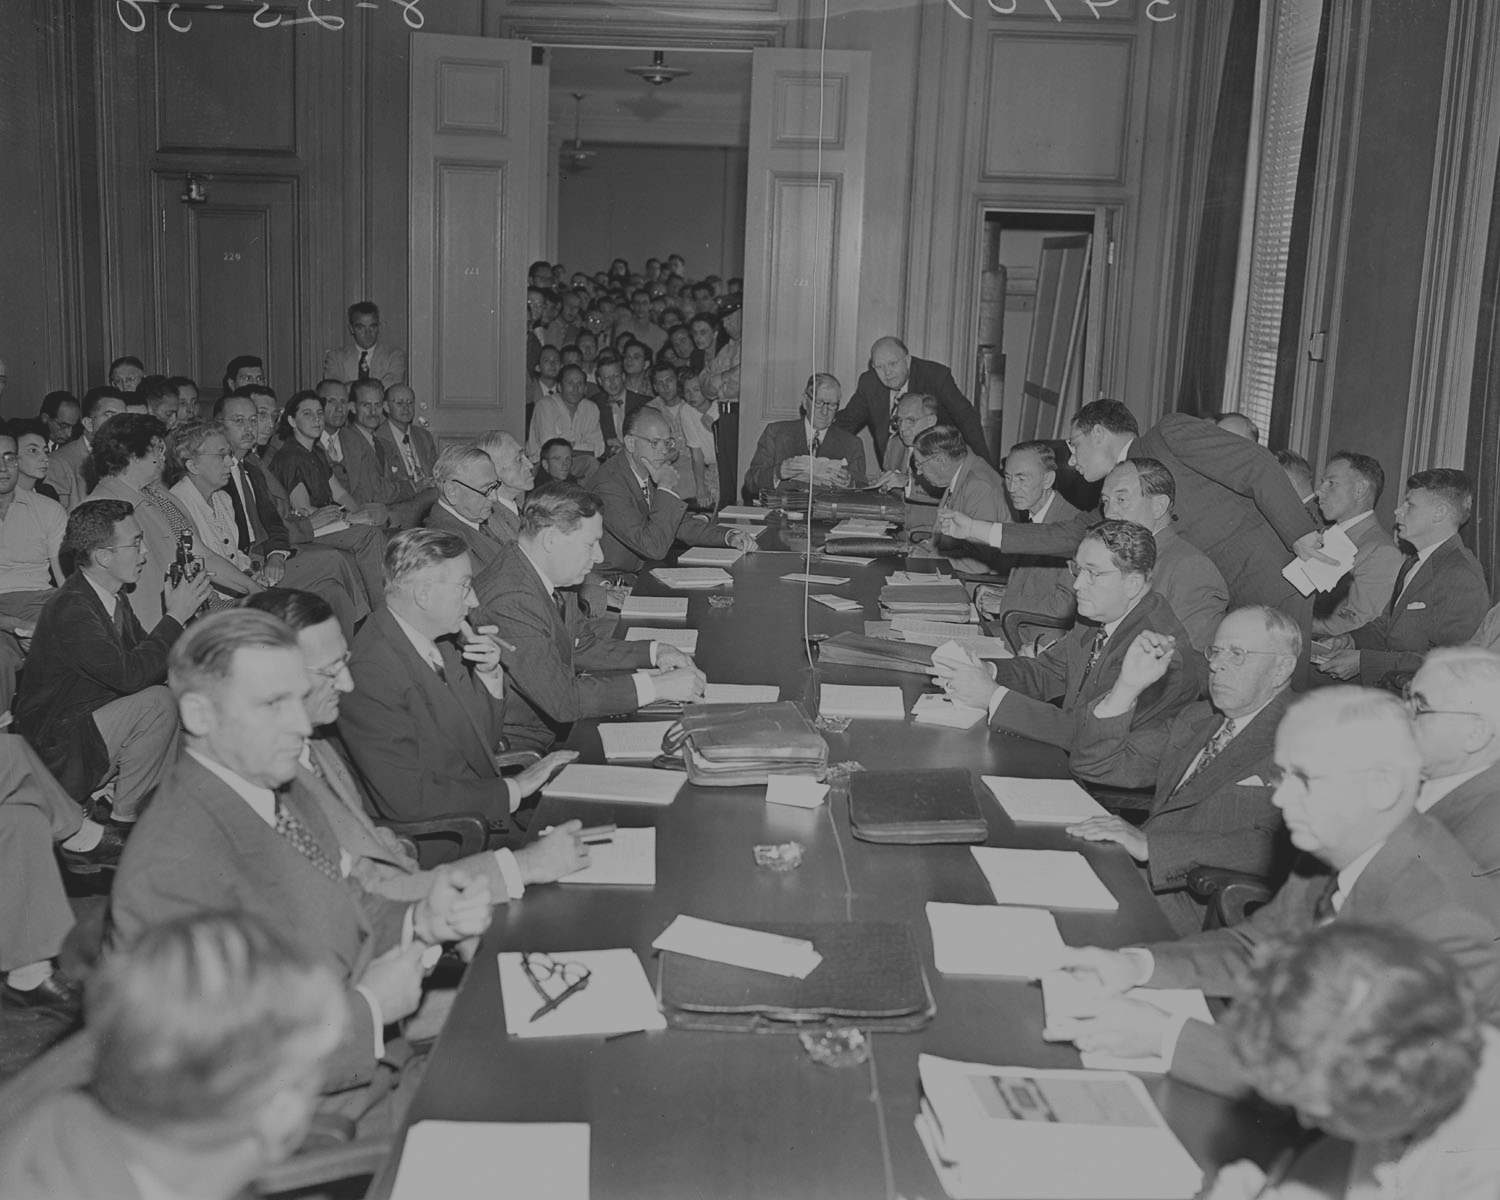 An historic photo of several people around a large table covered in papers.